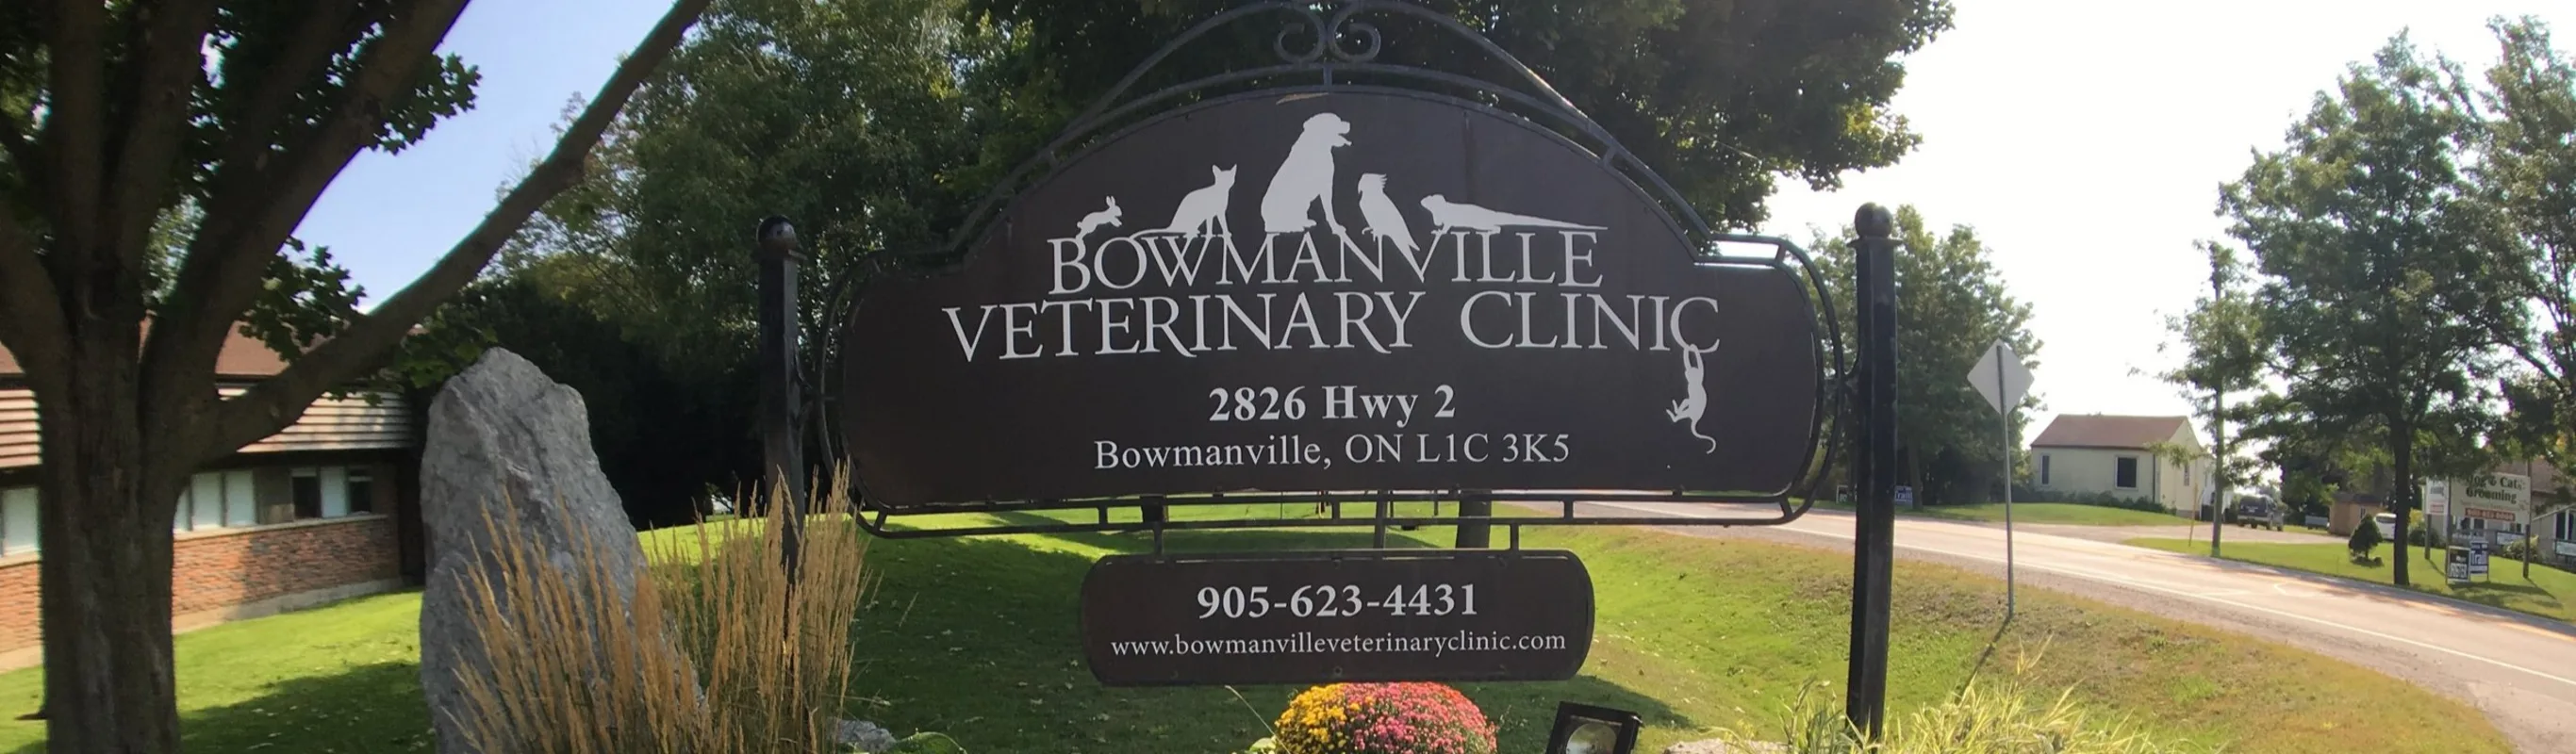 Bowmanville Veterinary Clinic sign